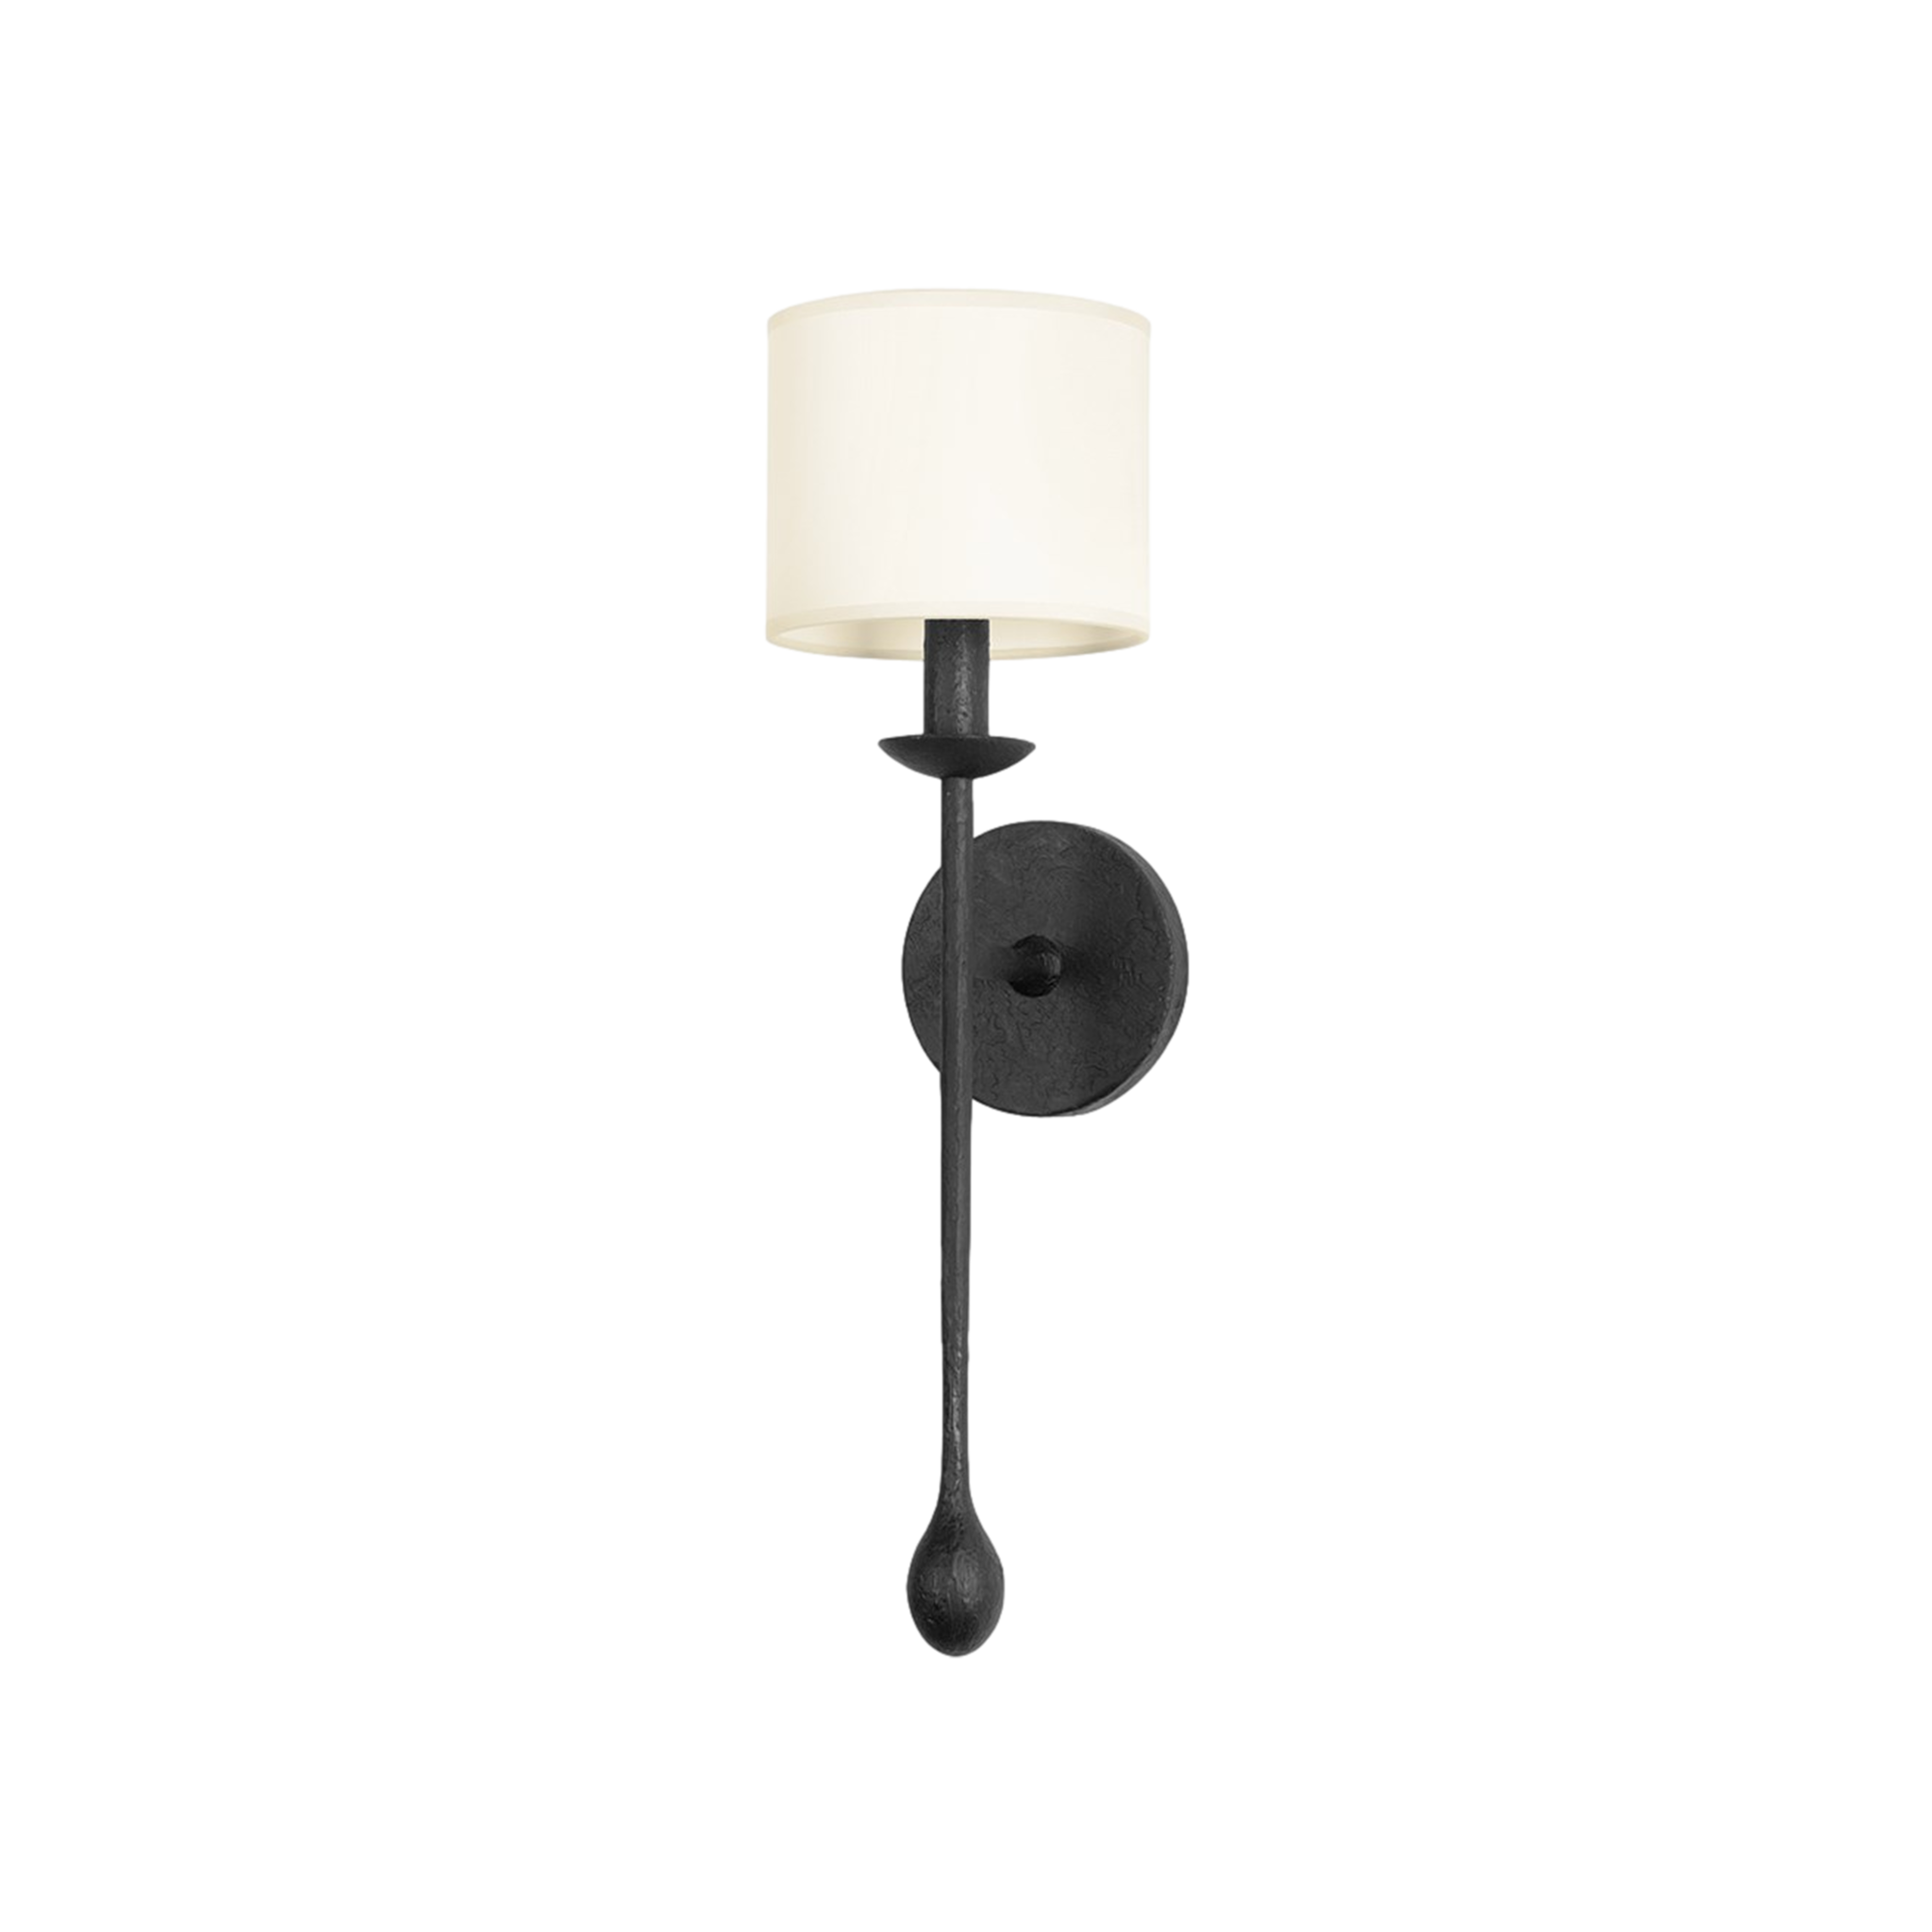 Osmond Wall Sconce